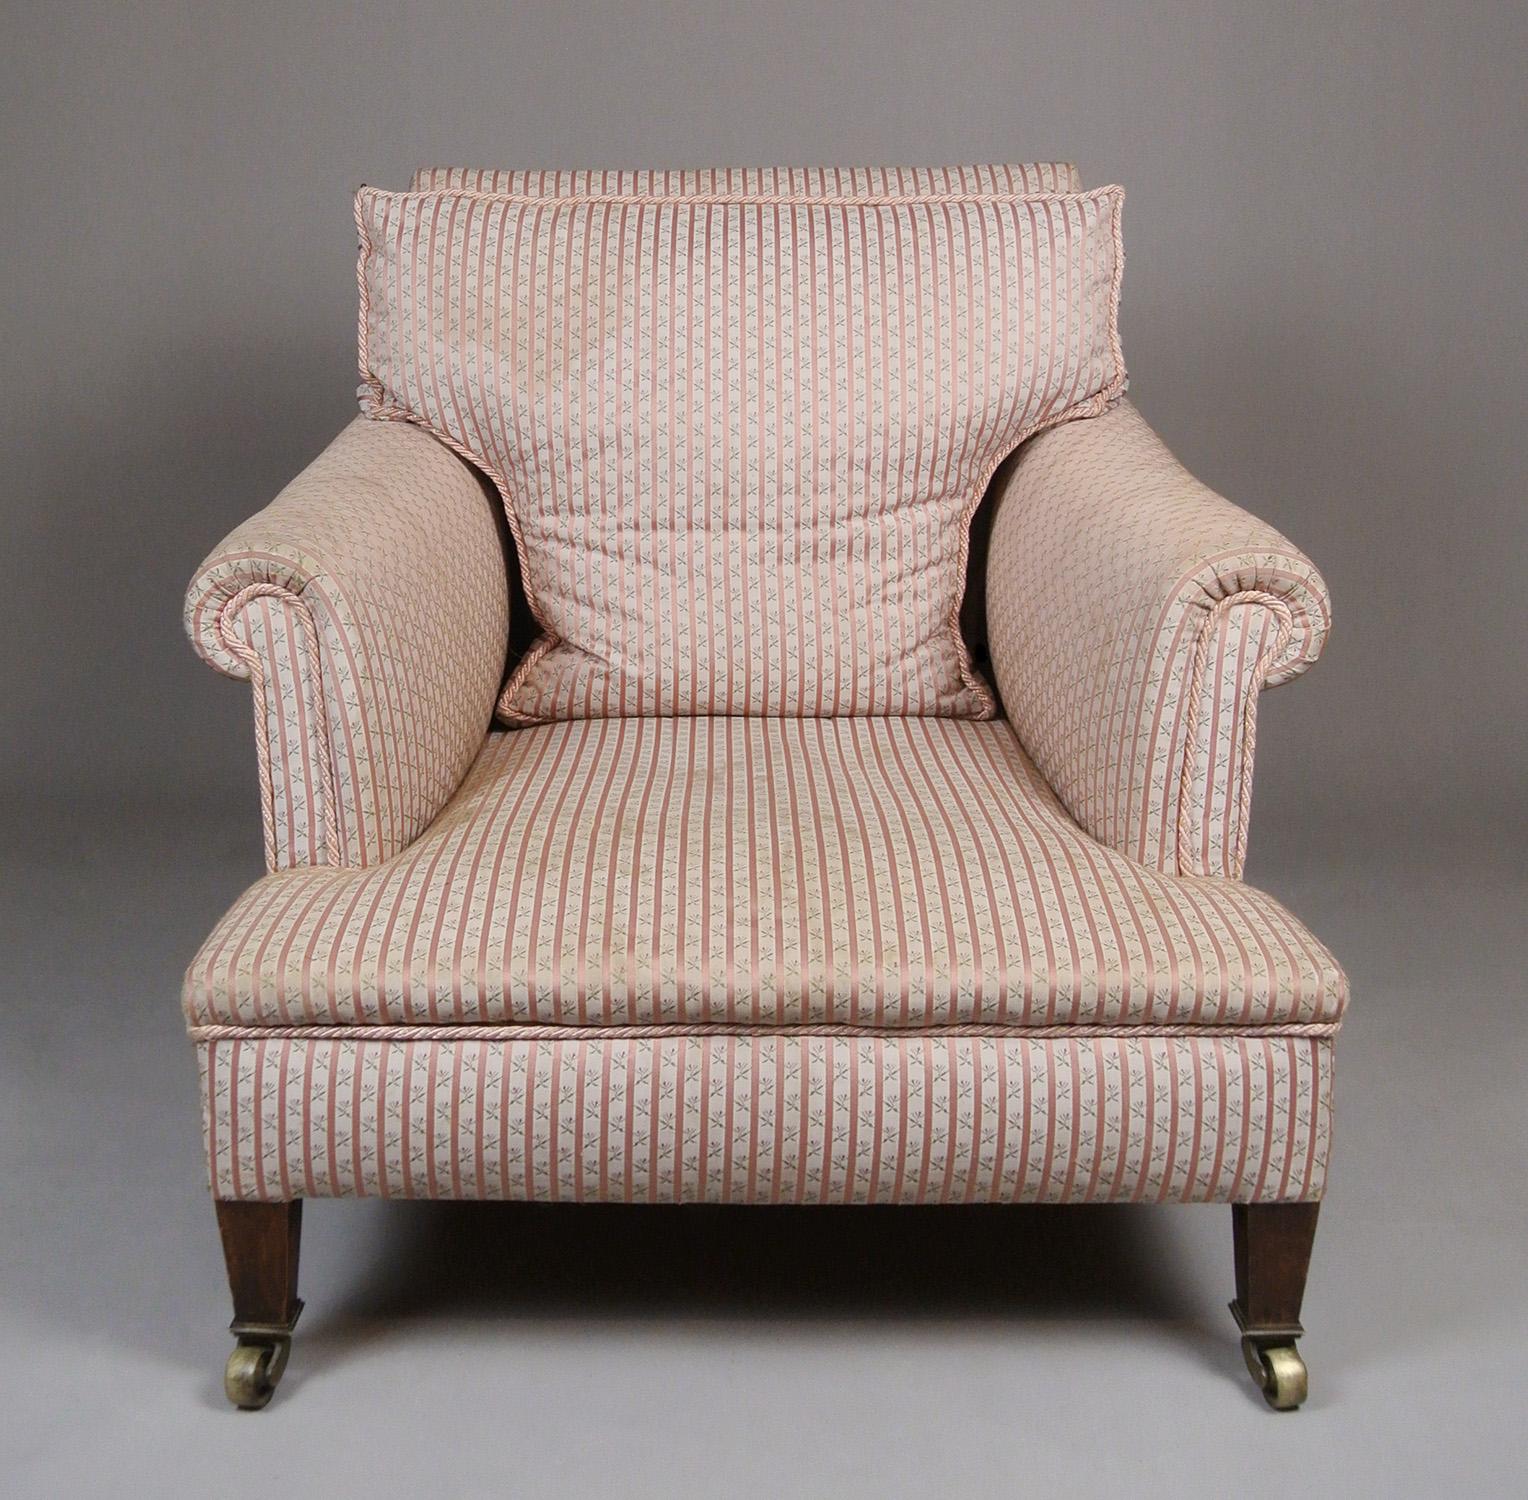 Exceptionally comfortable deep seated armchair - probably by Howard & Sons Limited. Not stamped. The design and construction and proportions match those of a Bridgewater armchair but sold here as a Howard & Sons style chair c. 1930

The frame